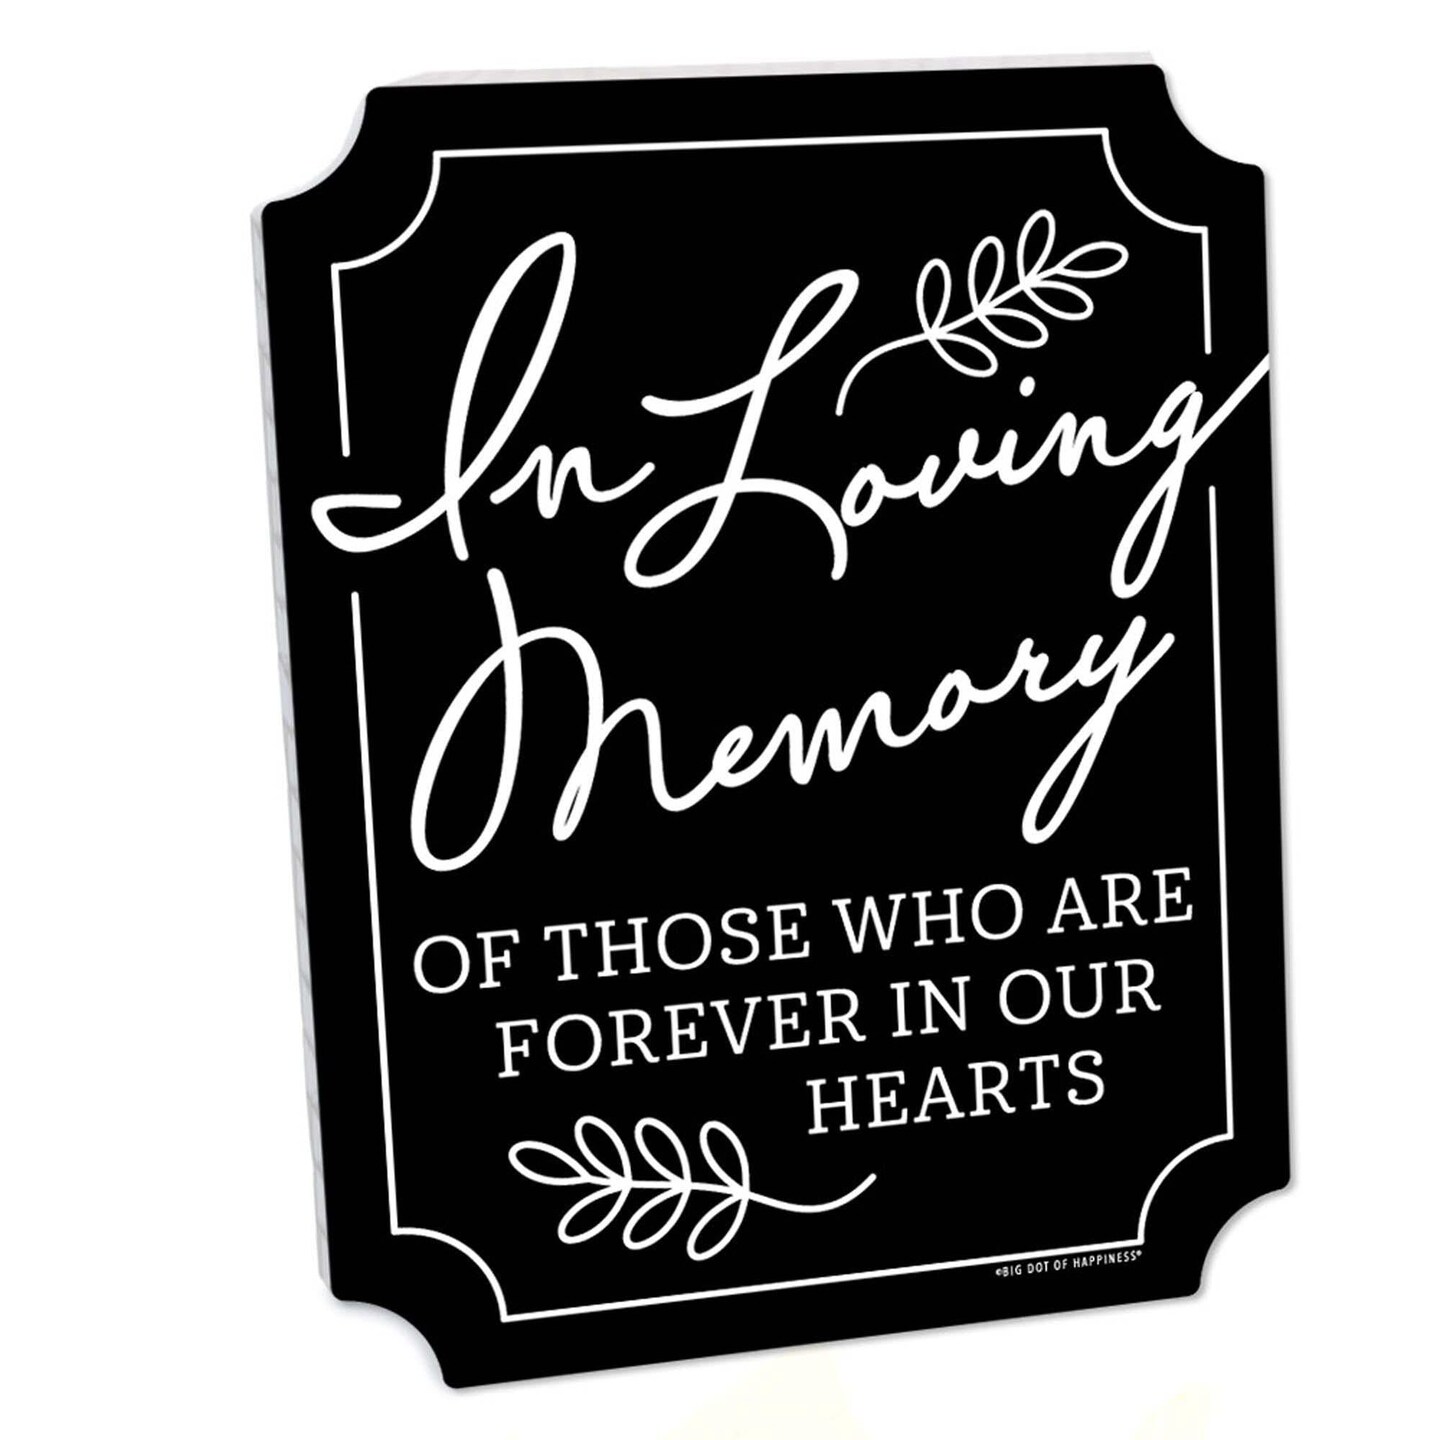 In Loving Memory Of Those Who Are Forever In Our Hearts Text And